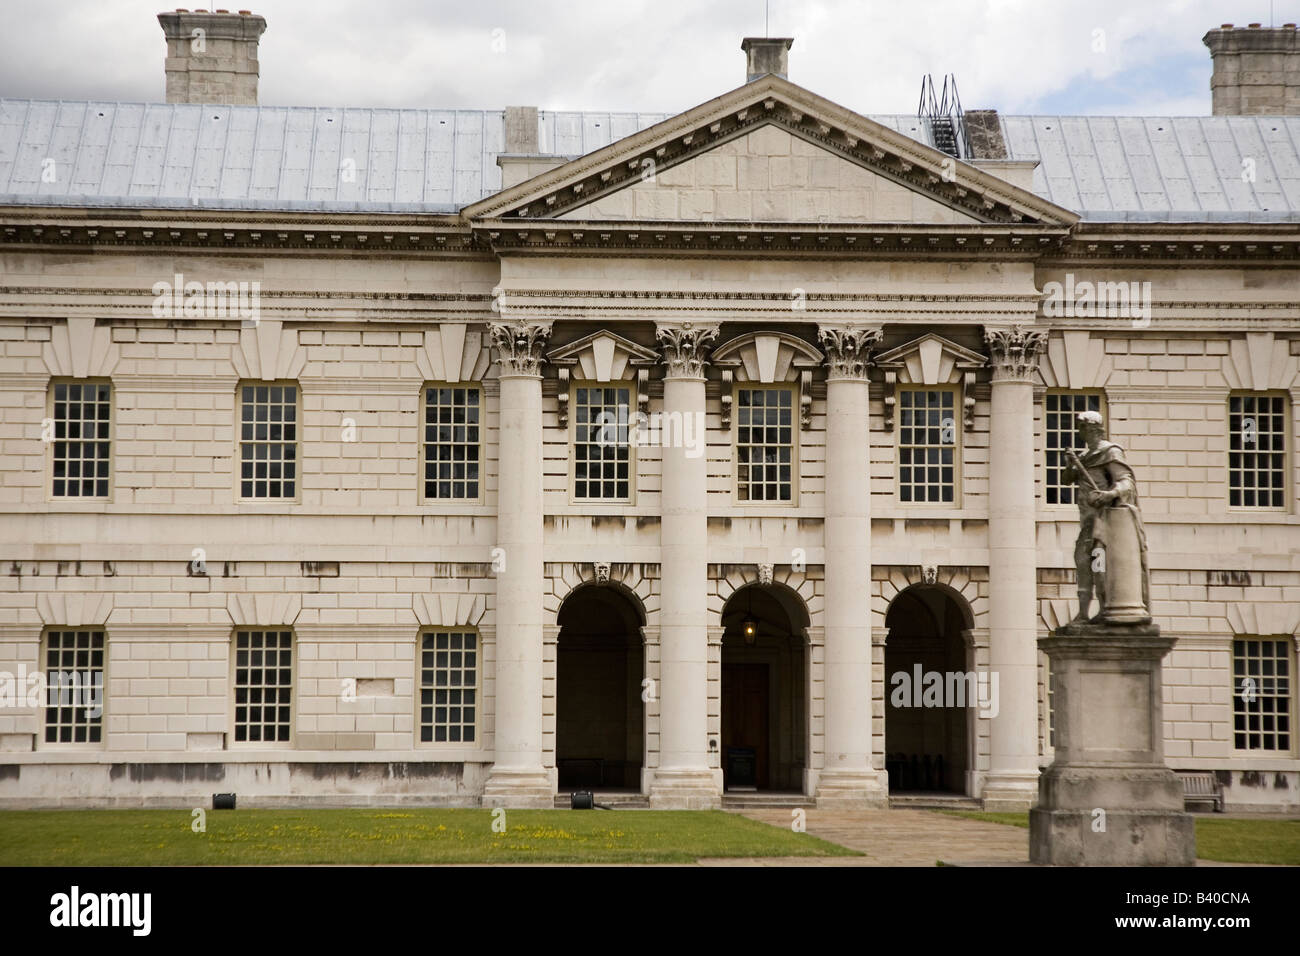 One of the buildings on the campus of the Old Royal Naval College at Greenwich in London. Stock Photo